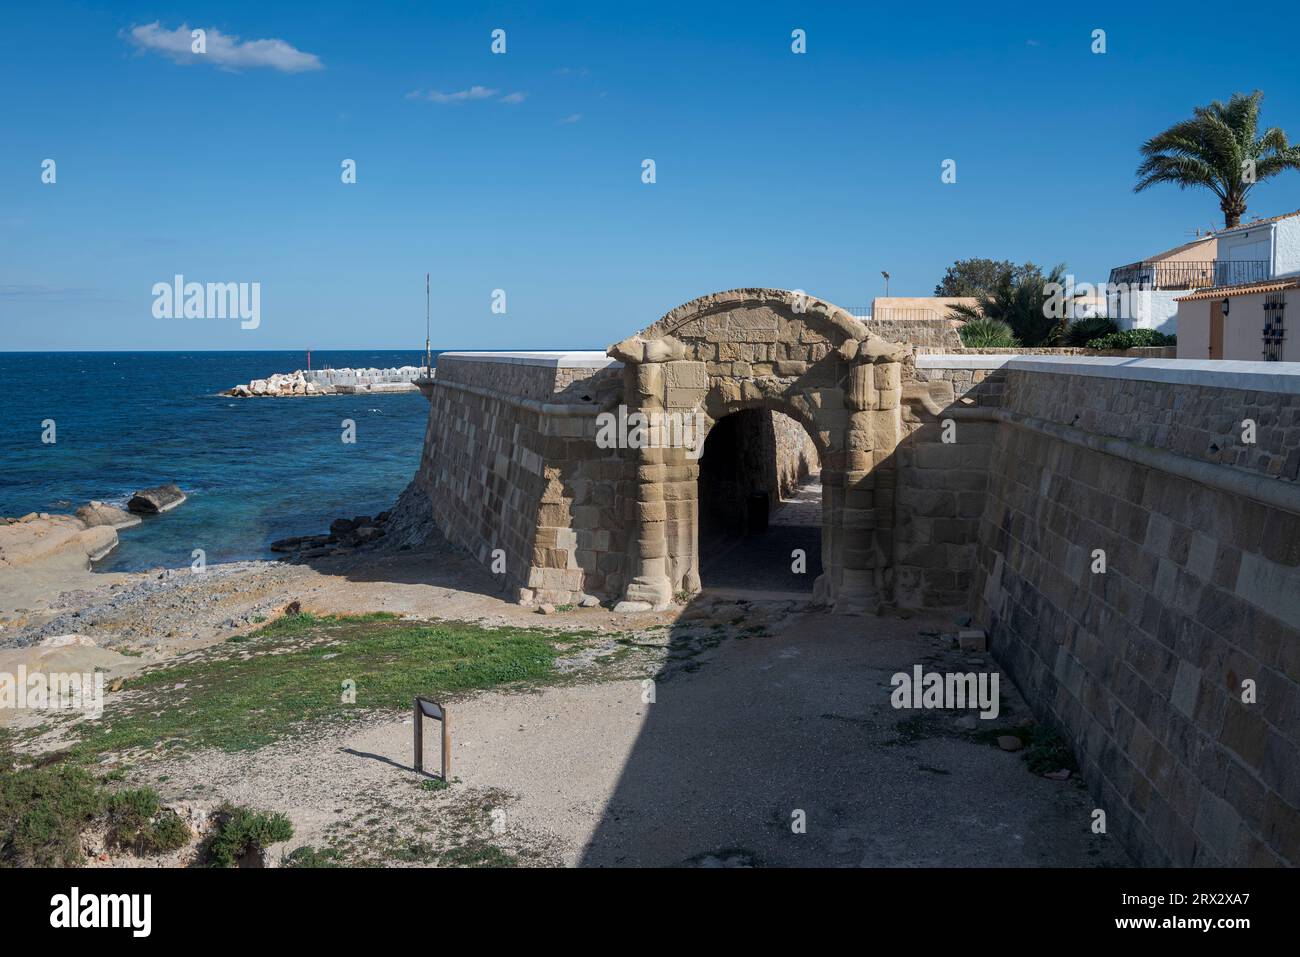 Gate of Tierra, in the old walls of Tabarca Island, in the municipality of Alicante, Spain Stock Photo